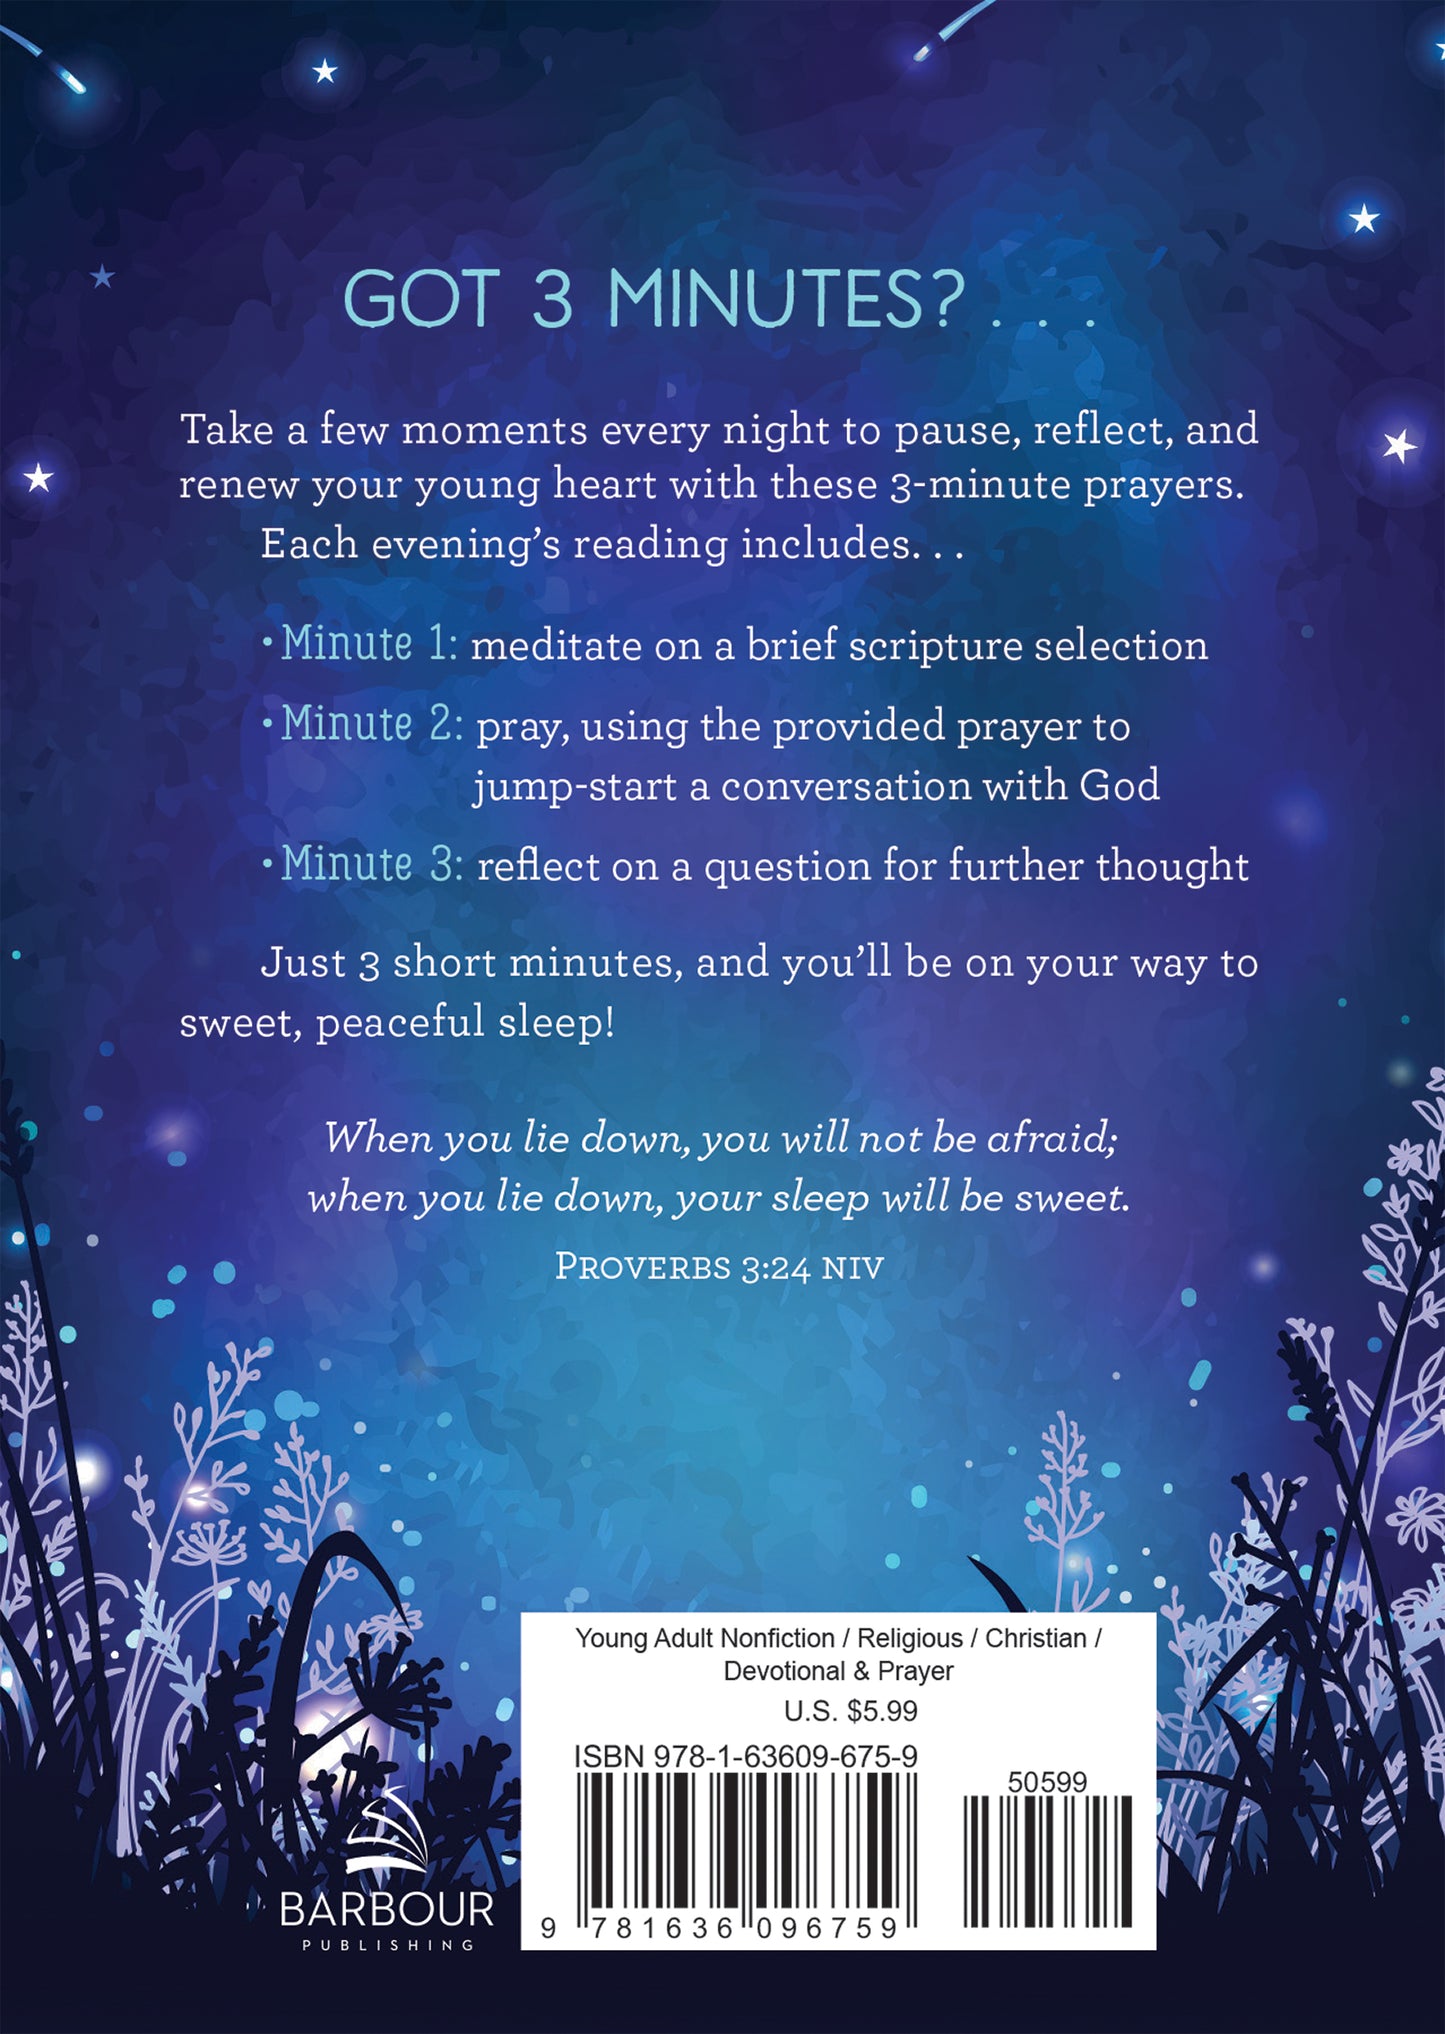 3-Minute Nighttime Prayers for Teen Girls - The Christian Gift Company